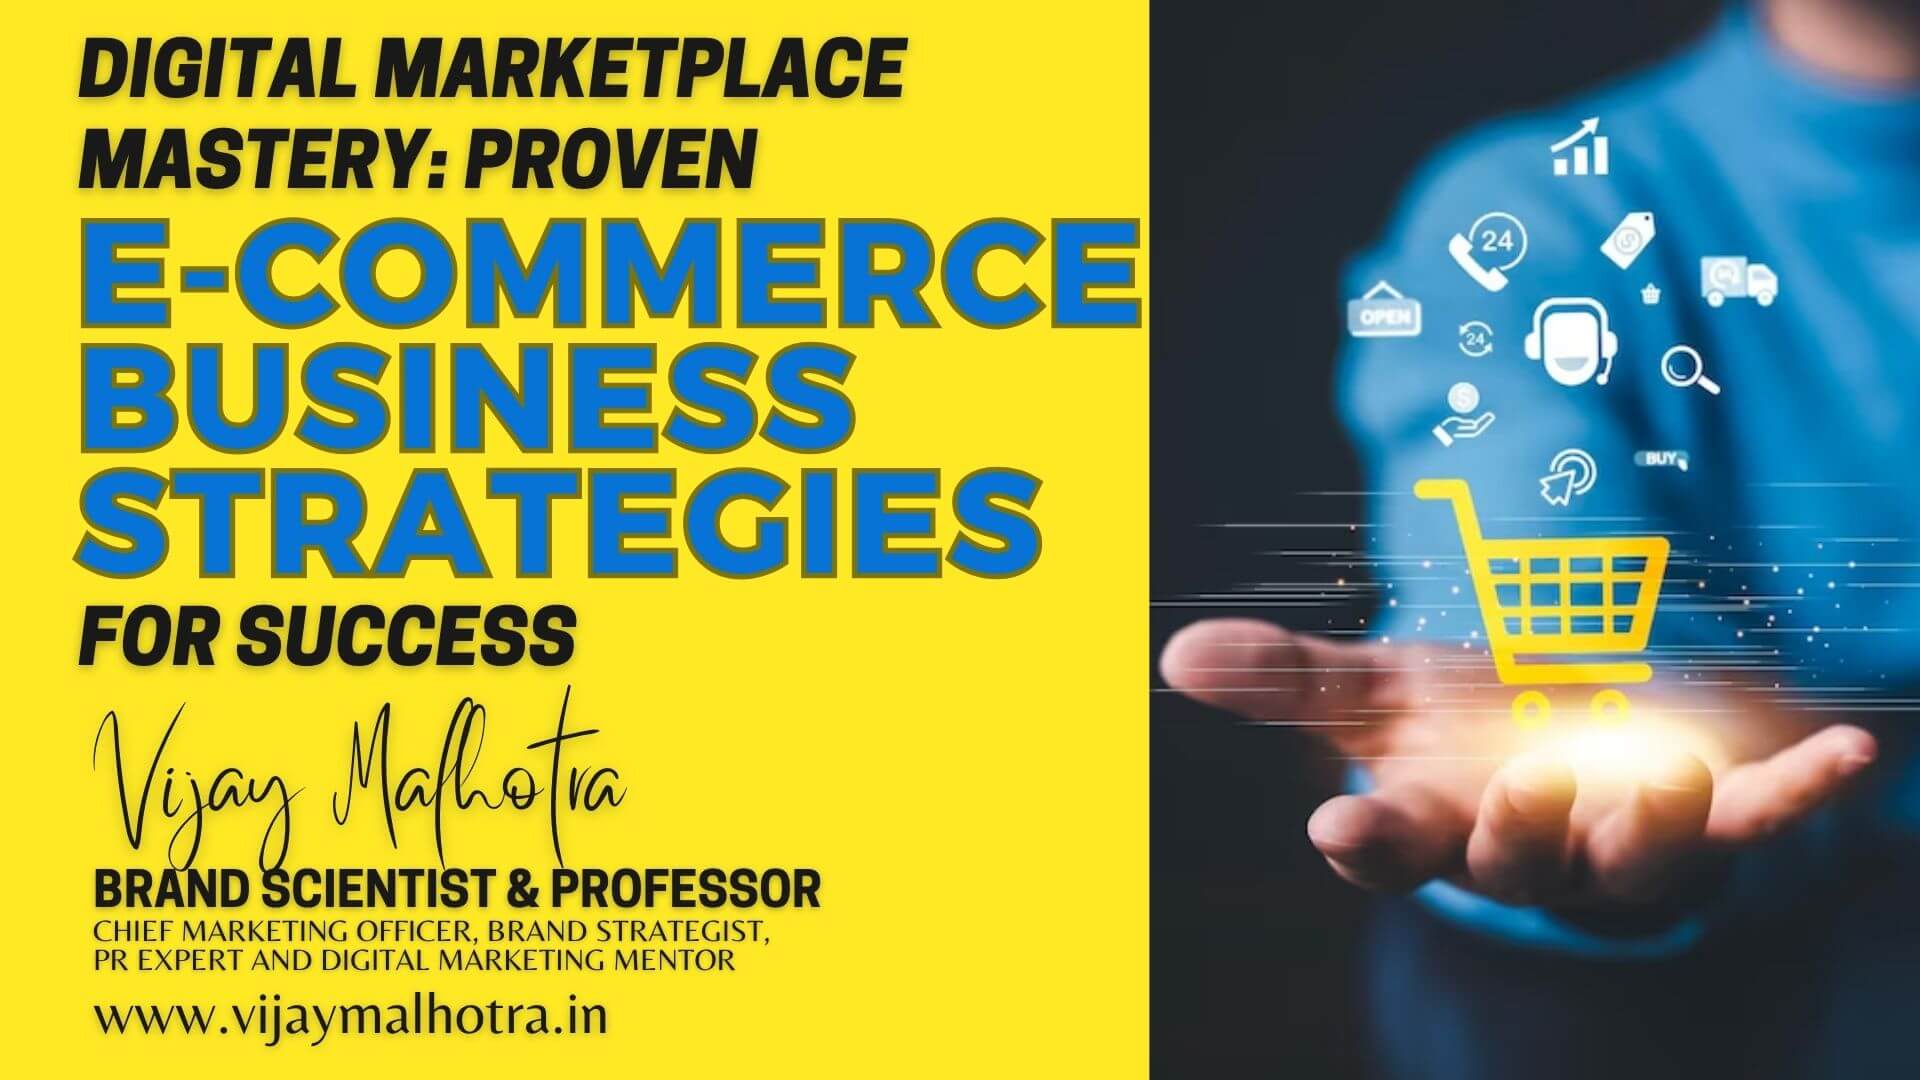 Insights from Vijay Malhotra on successful e-commerce strategies, highlighting digital marketplace mastery for business success